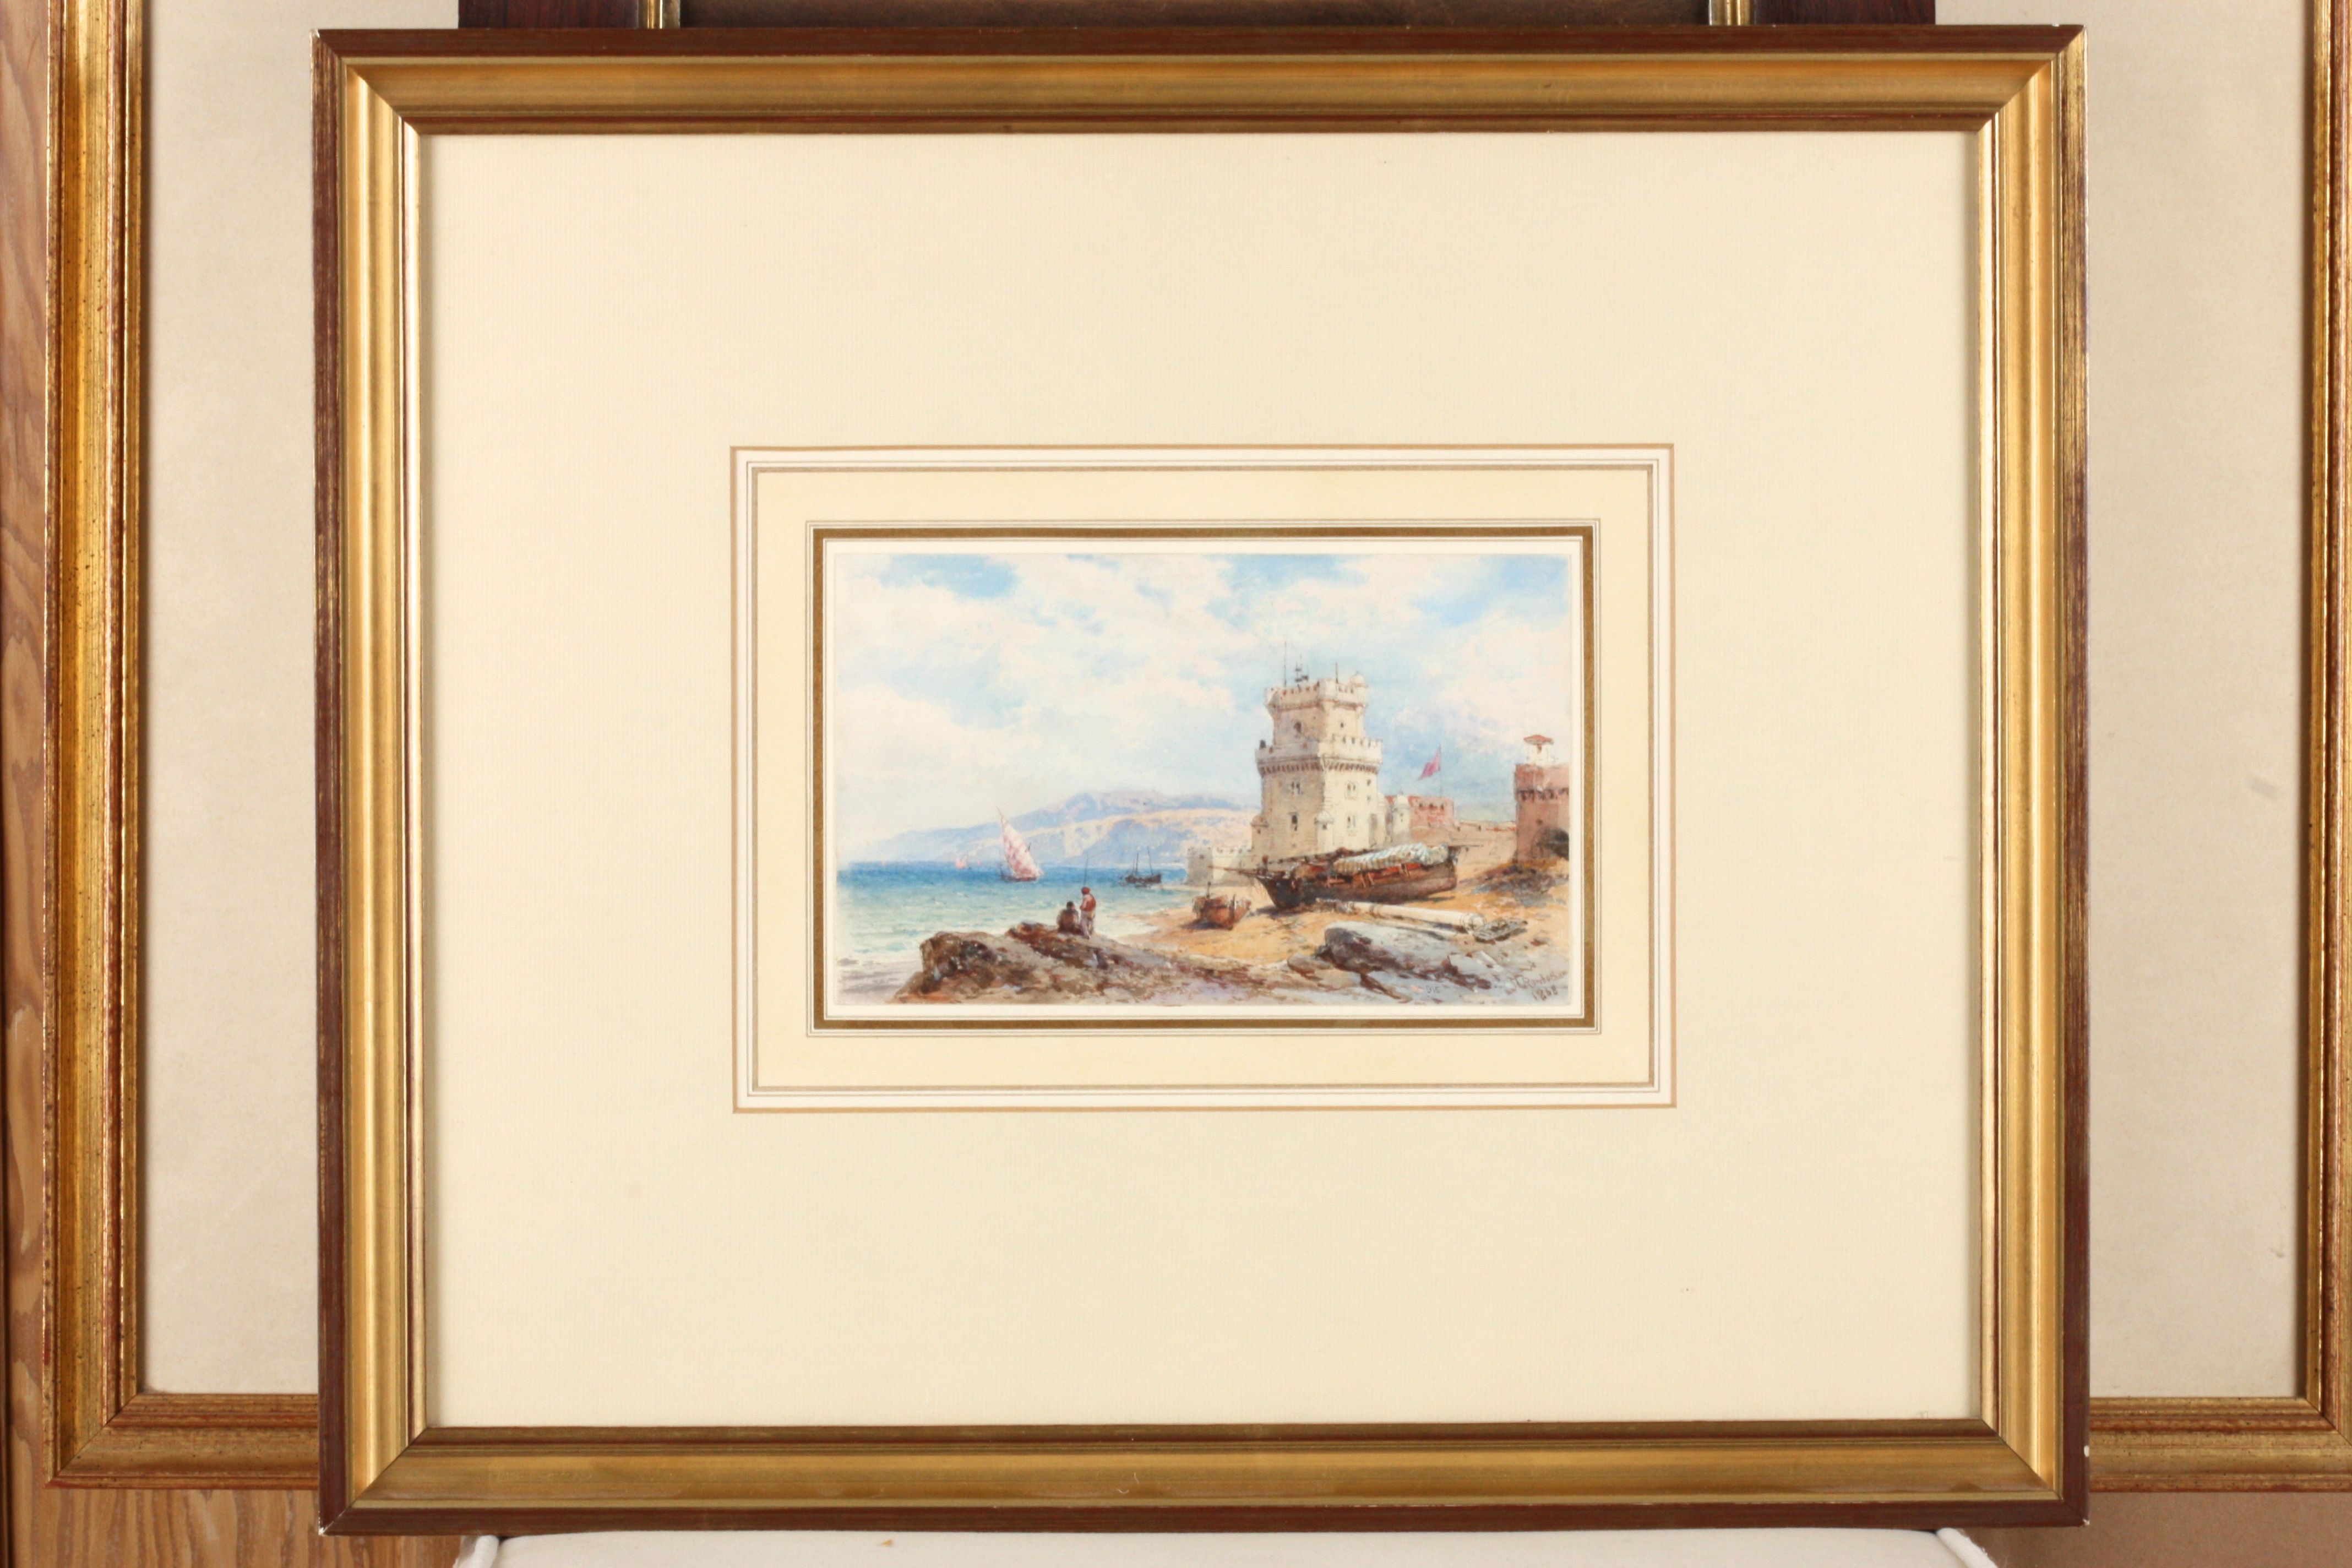 Thomas Leeson Rowbotham (British 1783-1853)
'Fort of Belem at the mouth of the Tagus outside Lisbon' - Image 2 of 2